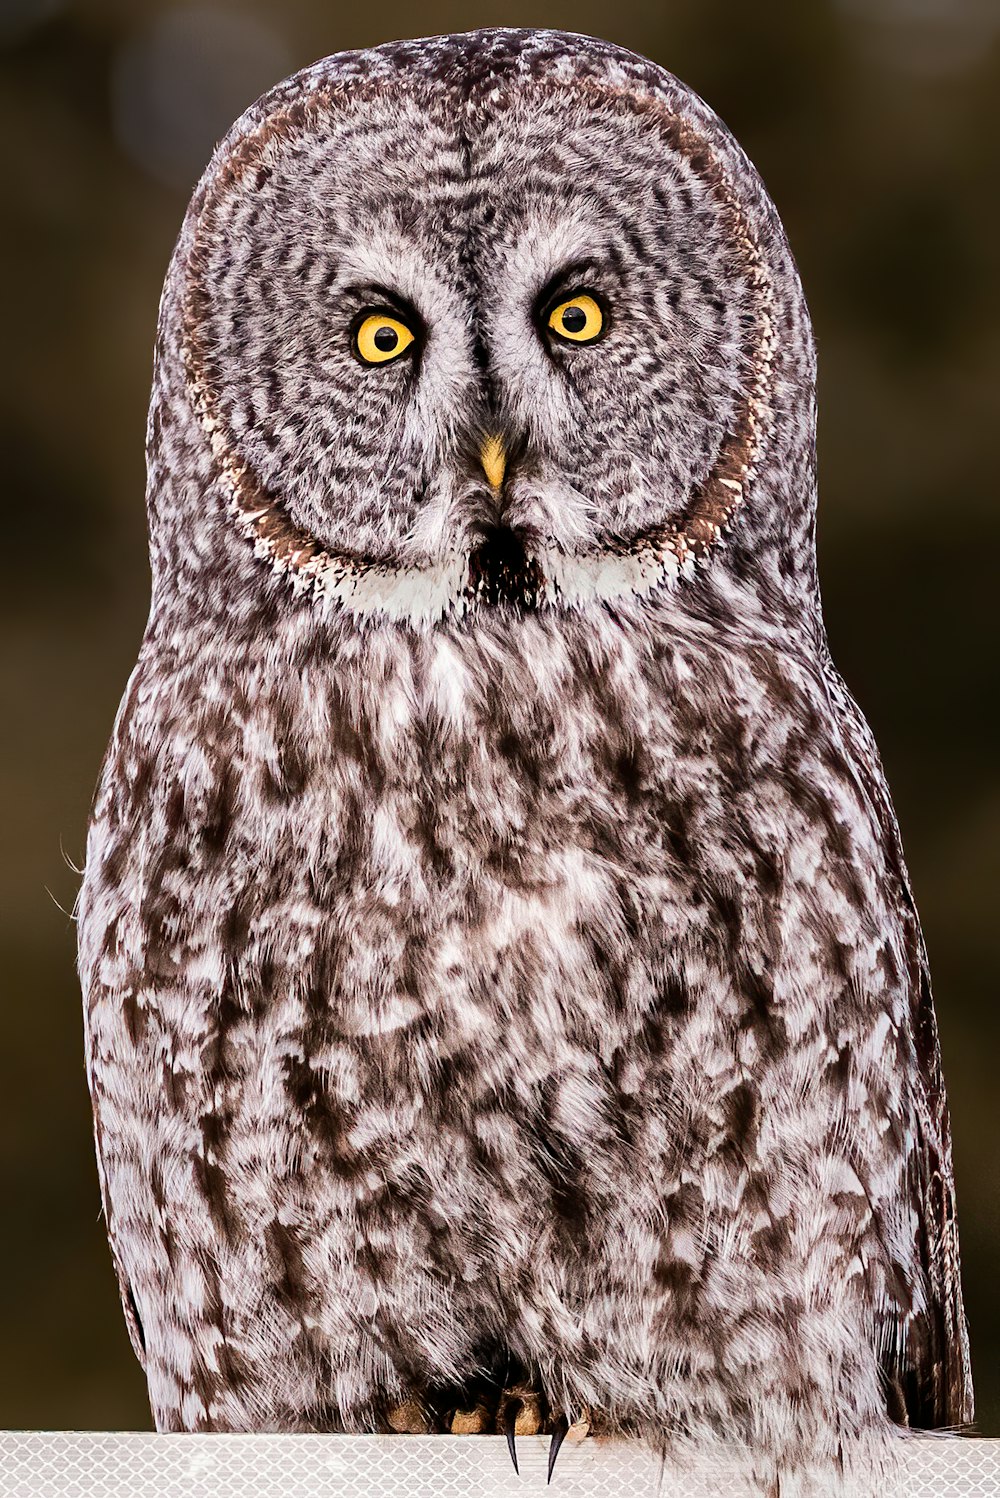 white and black owl with yellow eyes